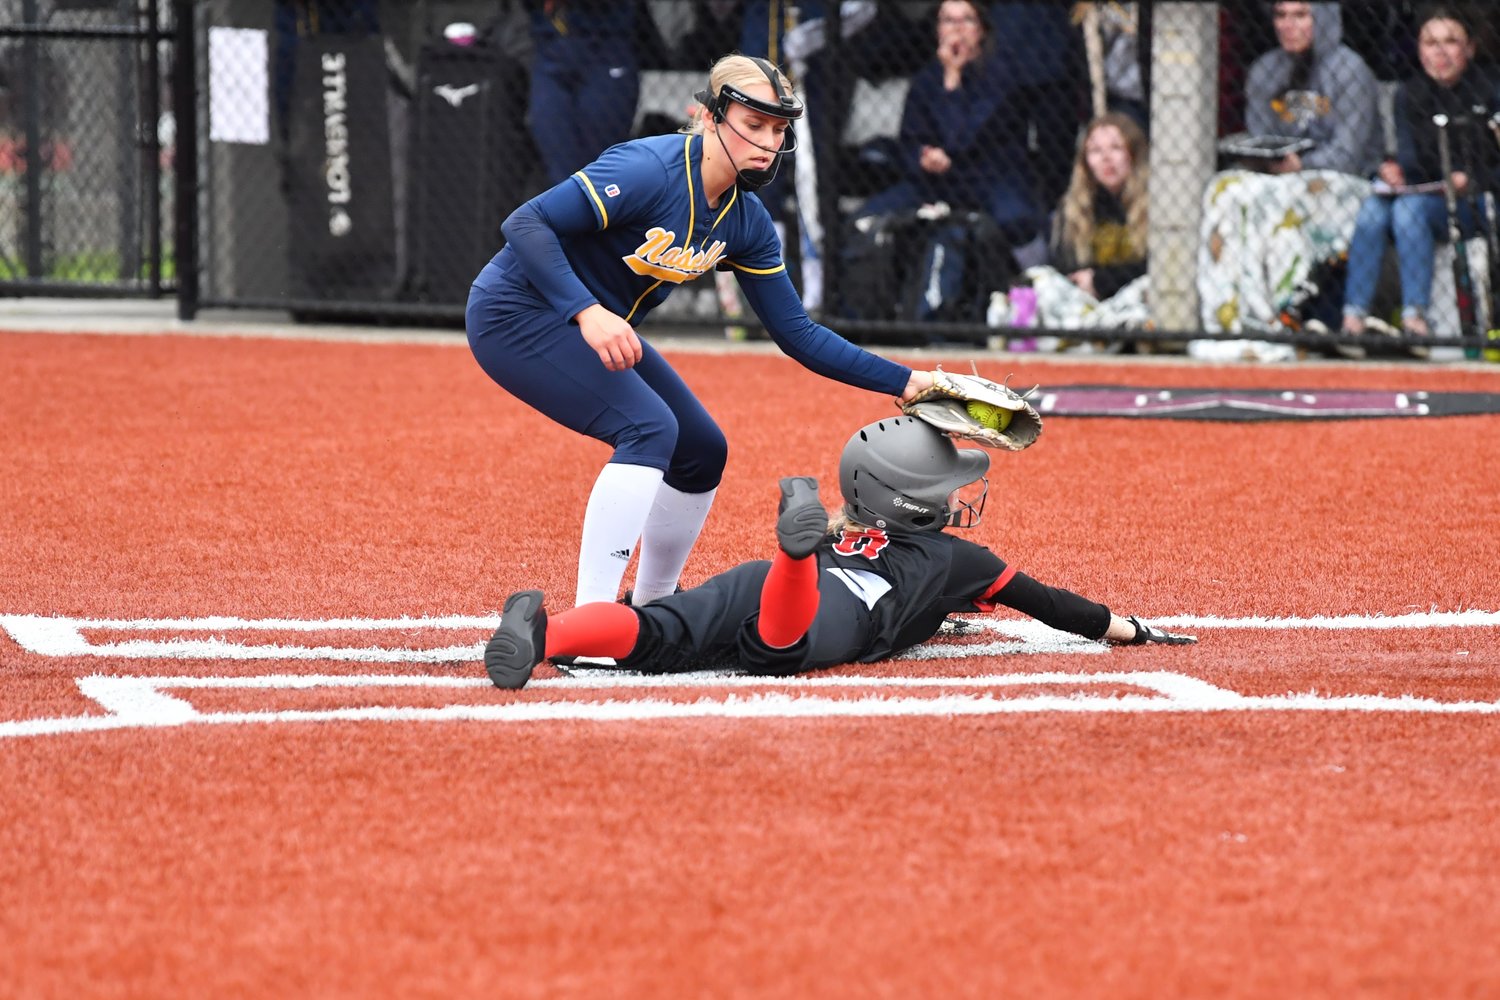 Addison Barrows slides in under the tag of Naselle pitcher Brynn Tarabochia on play at the plate after passed ball.